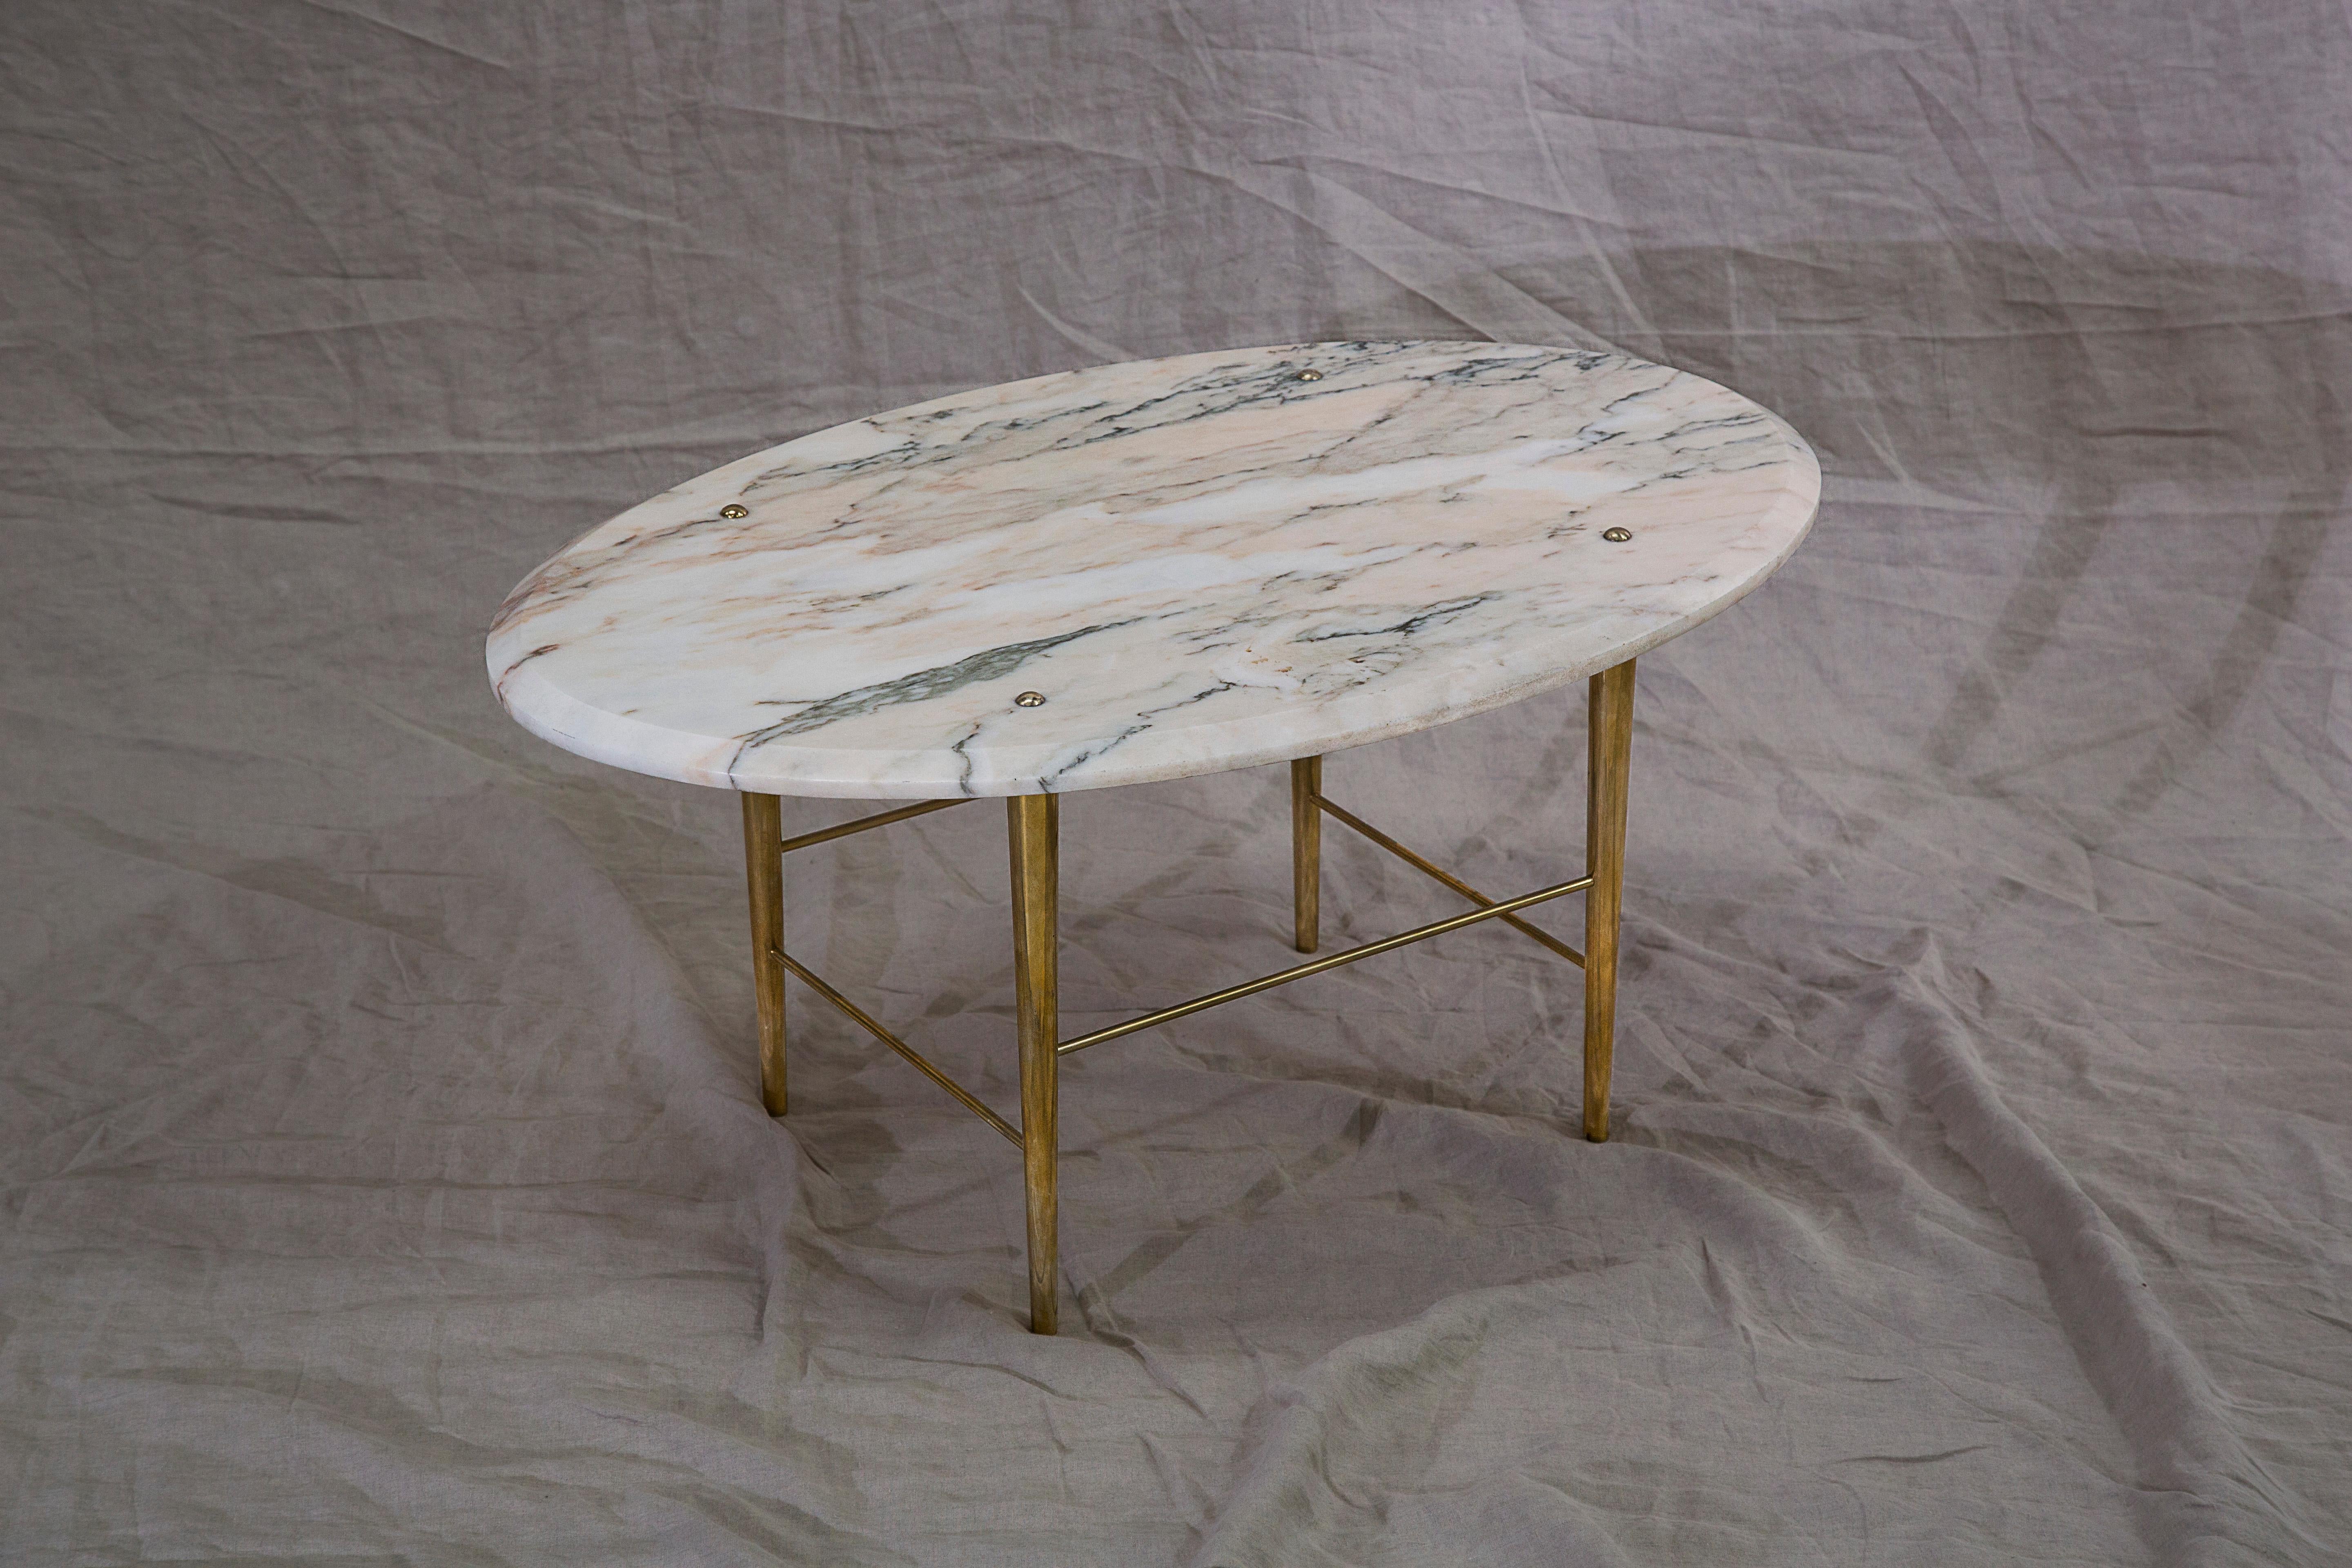 A coffee table in Portuguese marble and polished brass. Handcrafted to order in Northern England.

Measures: 1000 mm (L) x 640 mm (W) x 400 mm (H)

Bespoke sizes and finishes available.